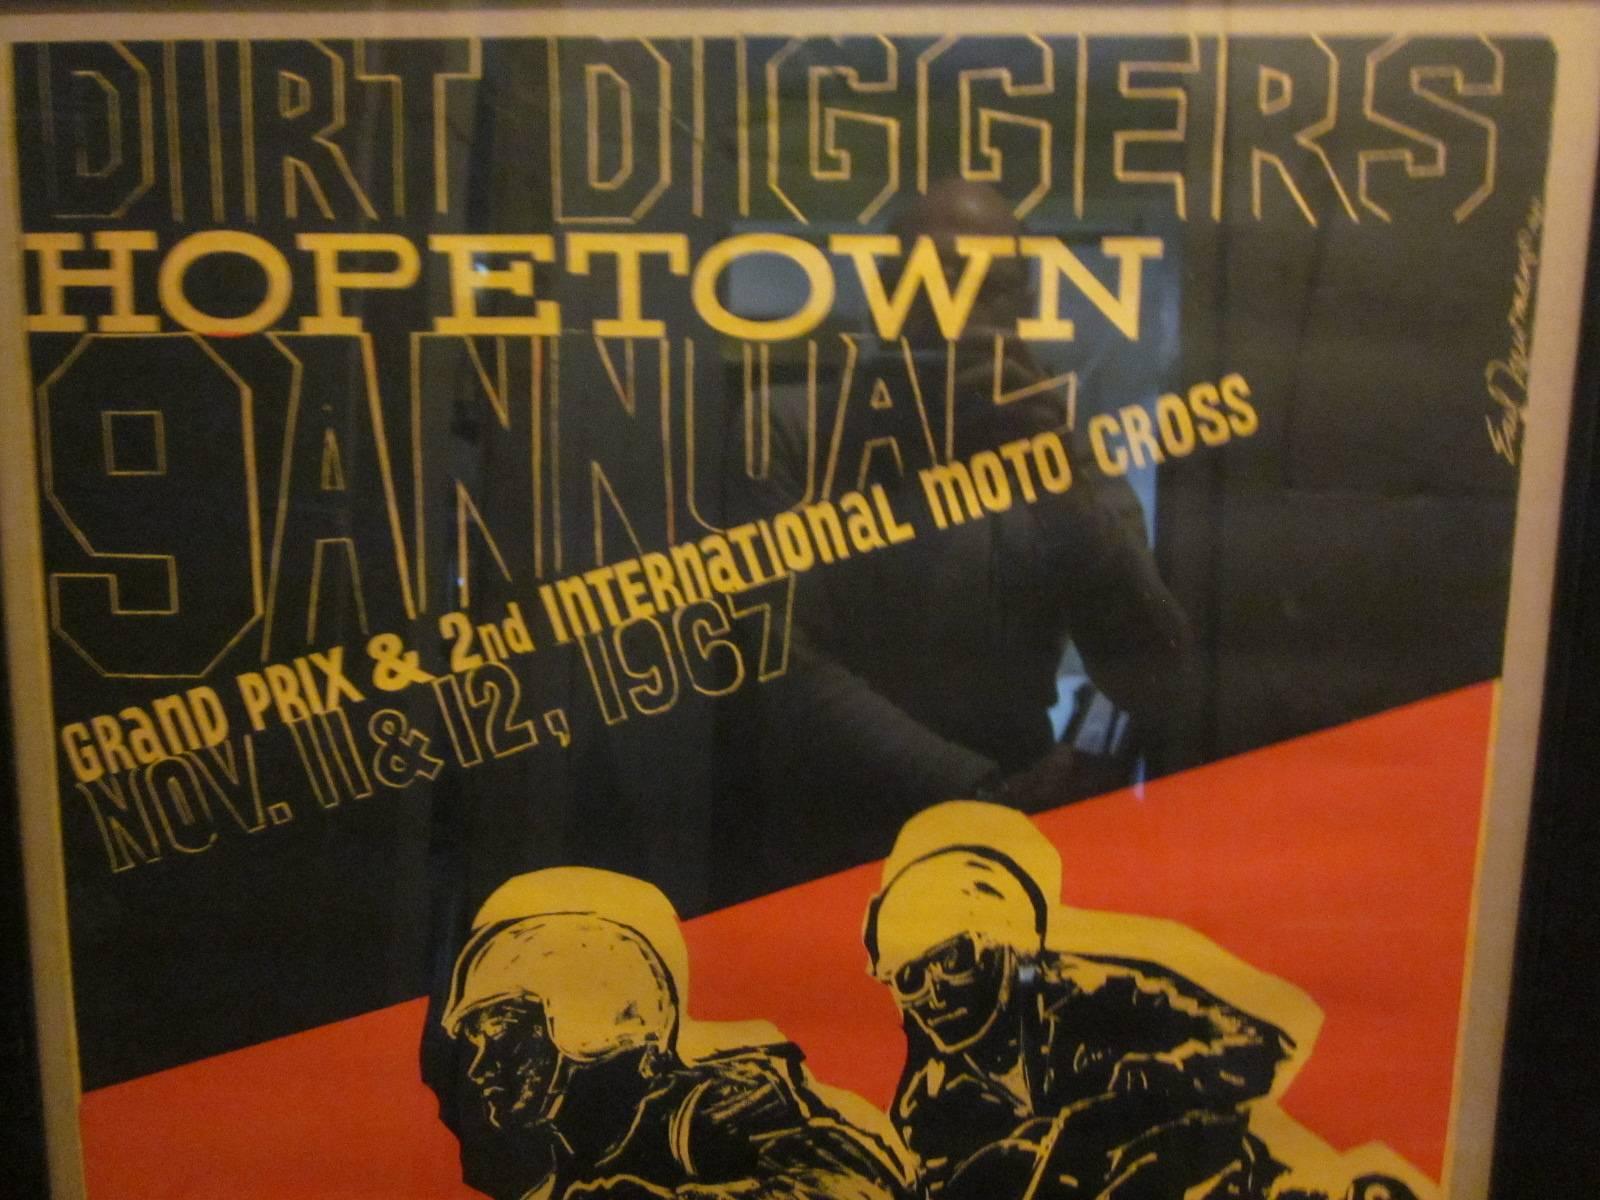 A vintage silkscreen motorcycle racing poster featuring the Dirt Diggers Hopetown 9th annual grand prix and 2nd international moto cross Nov. 11-12 1967. This is the second time the term Moto Cross was used for this type of international event,